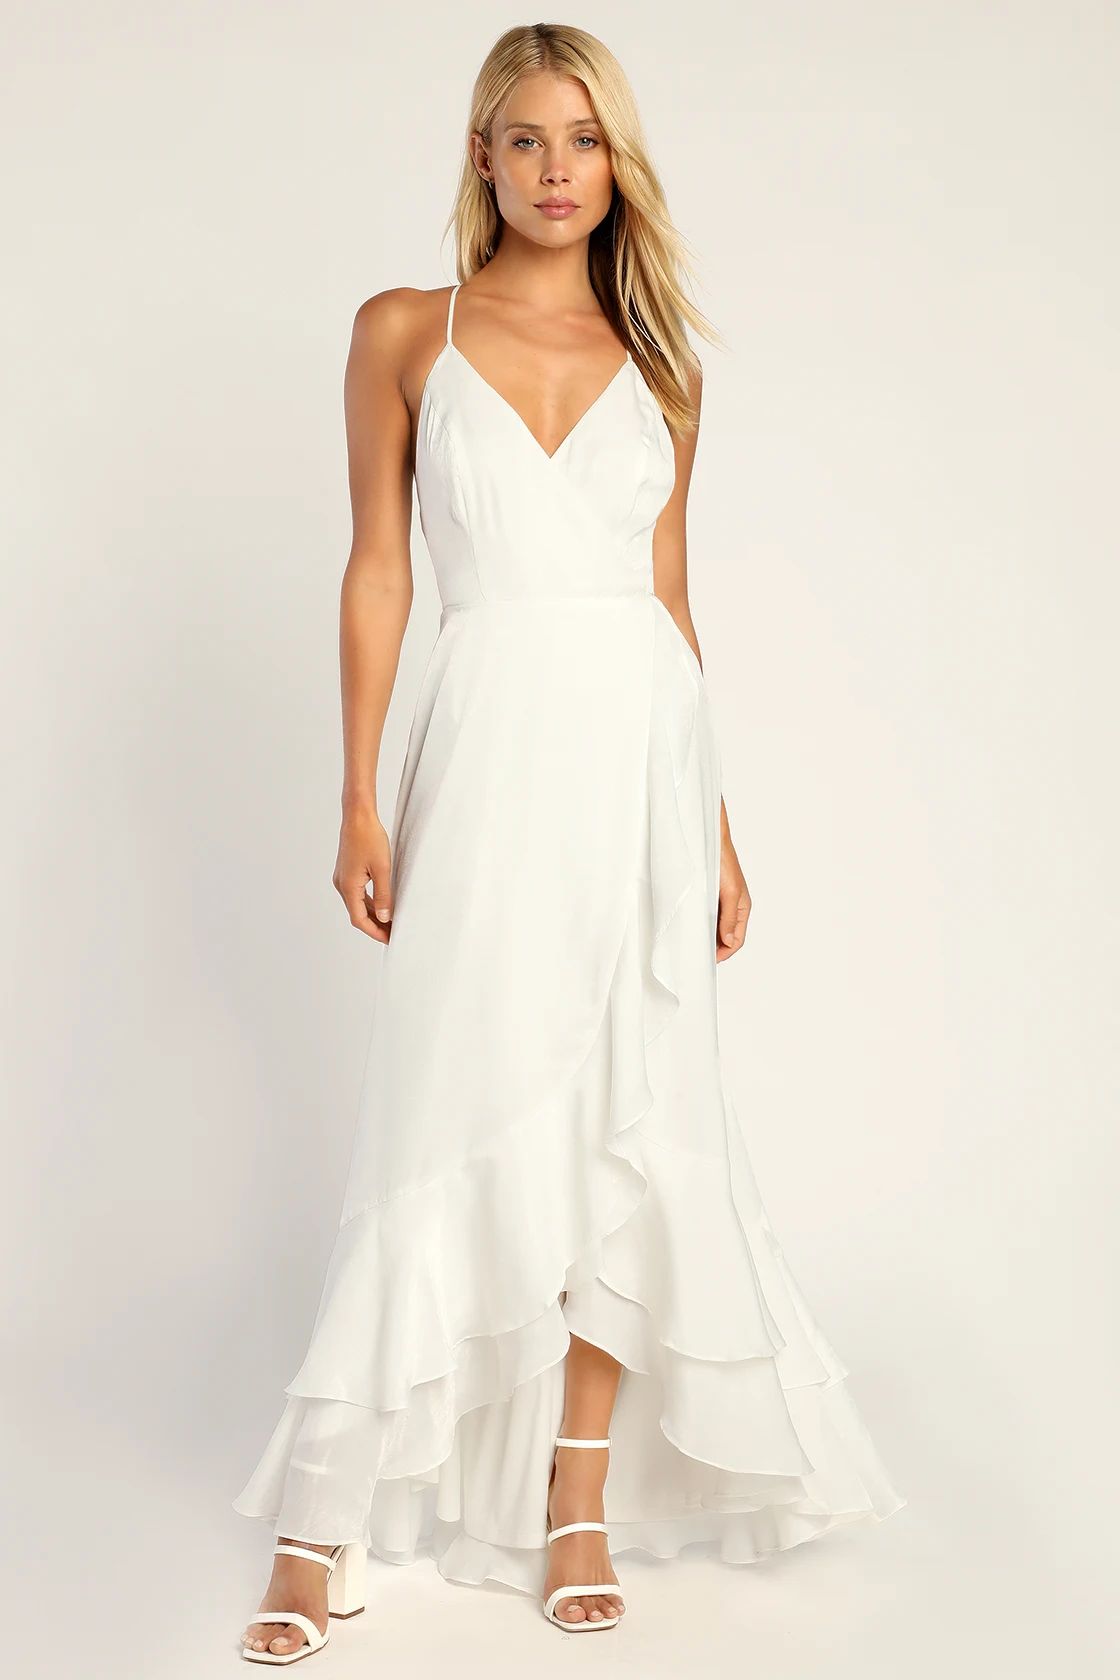 In Love Forever White Satin Lace-Up High-Low Maxi Dress | Lulus (US)